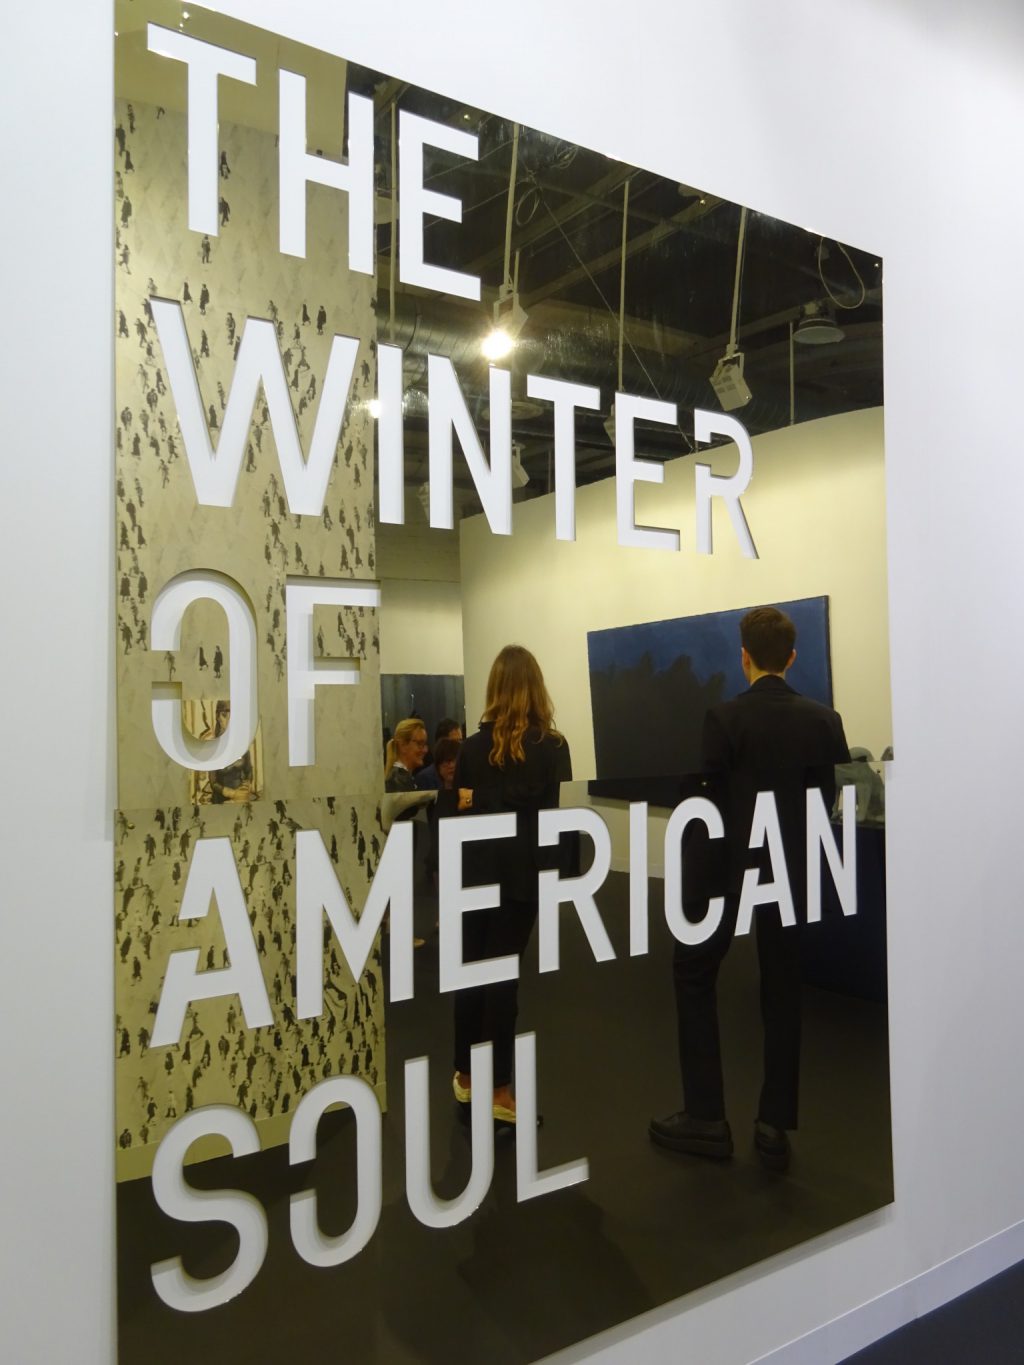 Rirkrit Tiravanija “untitled 2018 (the winter of american soul)” 2018, Polished brass, 226.7 x 186.1 overall, Edition of 2 with 1 AP @ Gavin Brown Enterprise